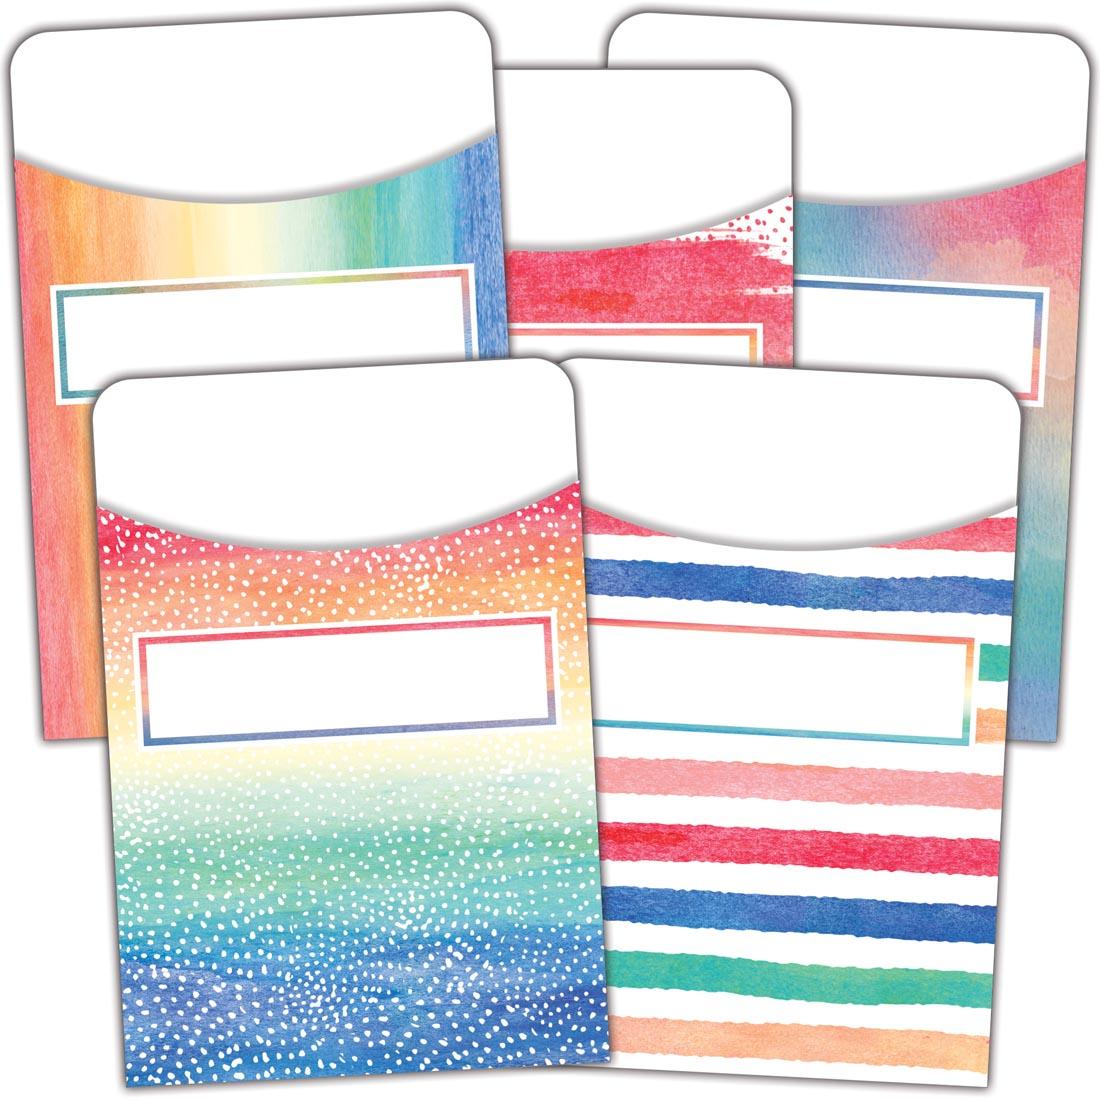 Library Pockets from the Watercolor collection by Teacher Created Resources